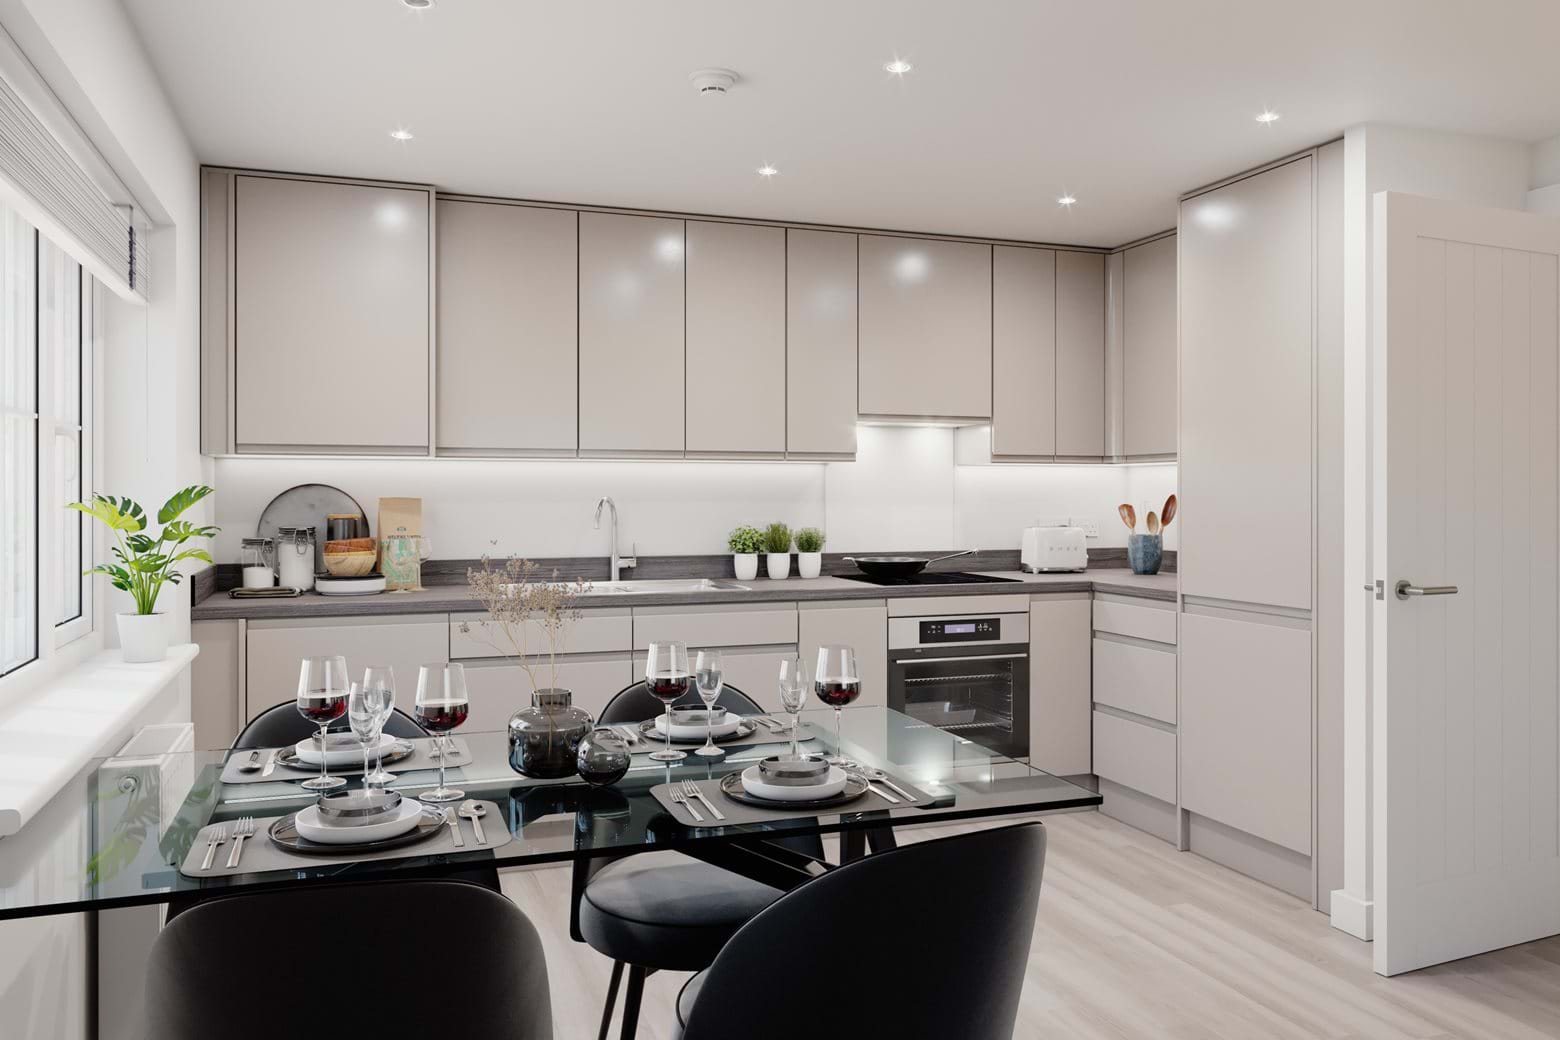 Limebrook Walk boasts impressive specification throughout including built-in appliances